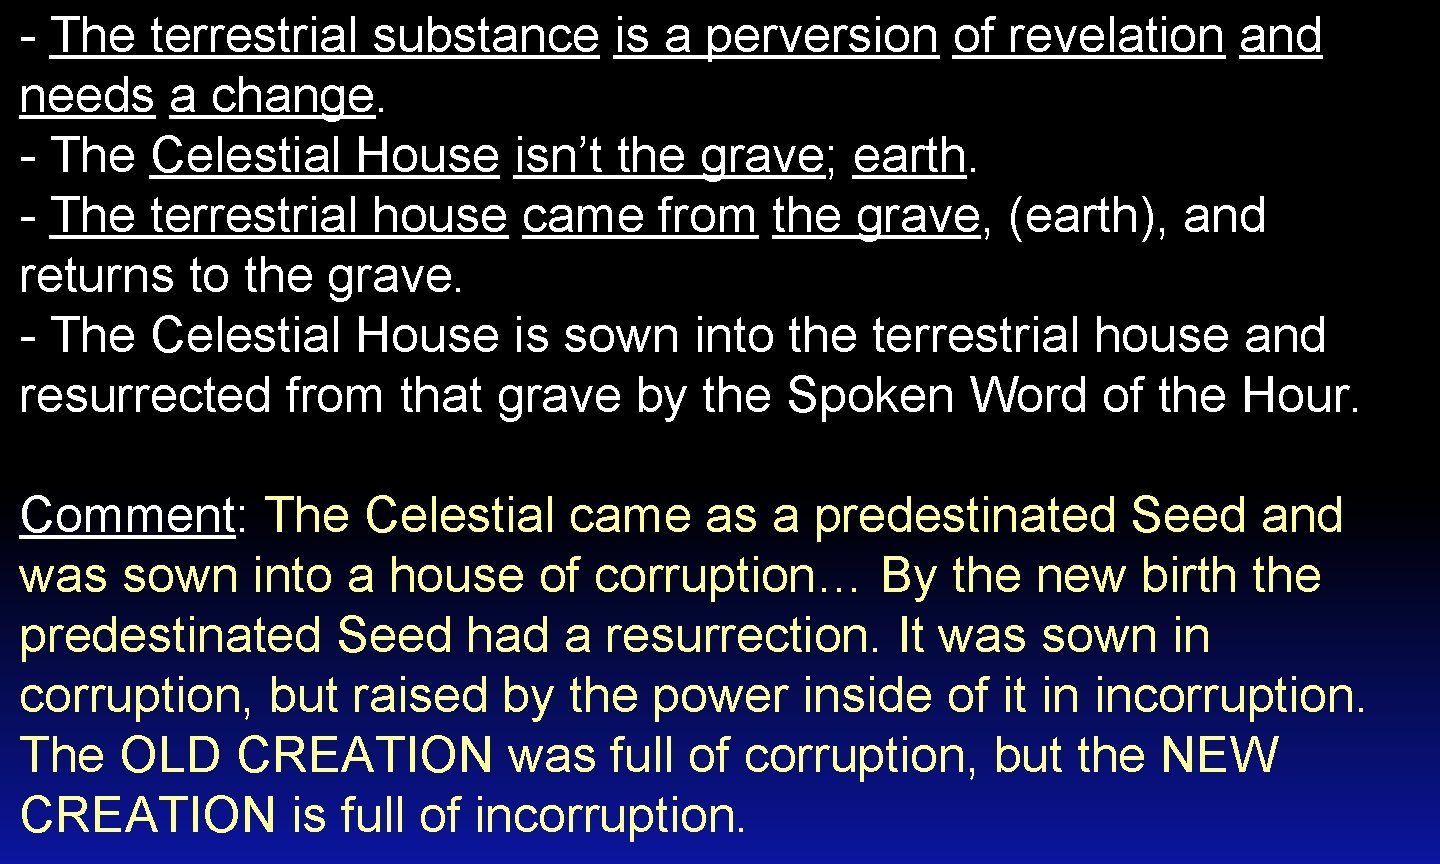 - The terrestrial substance is a perversion of revelation and needs a change. -